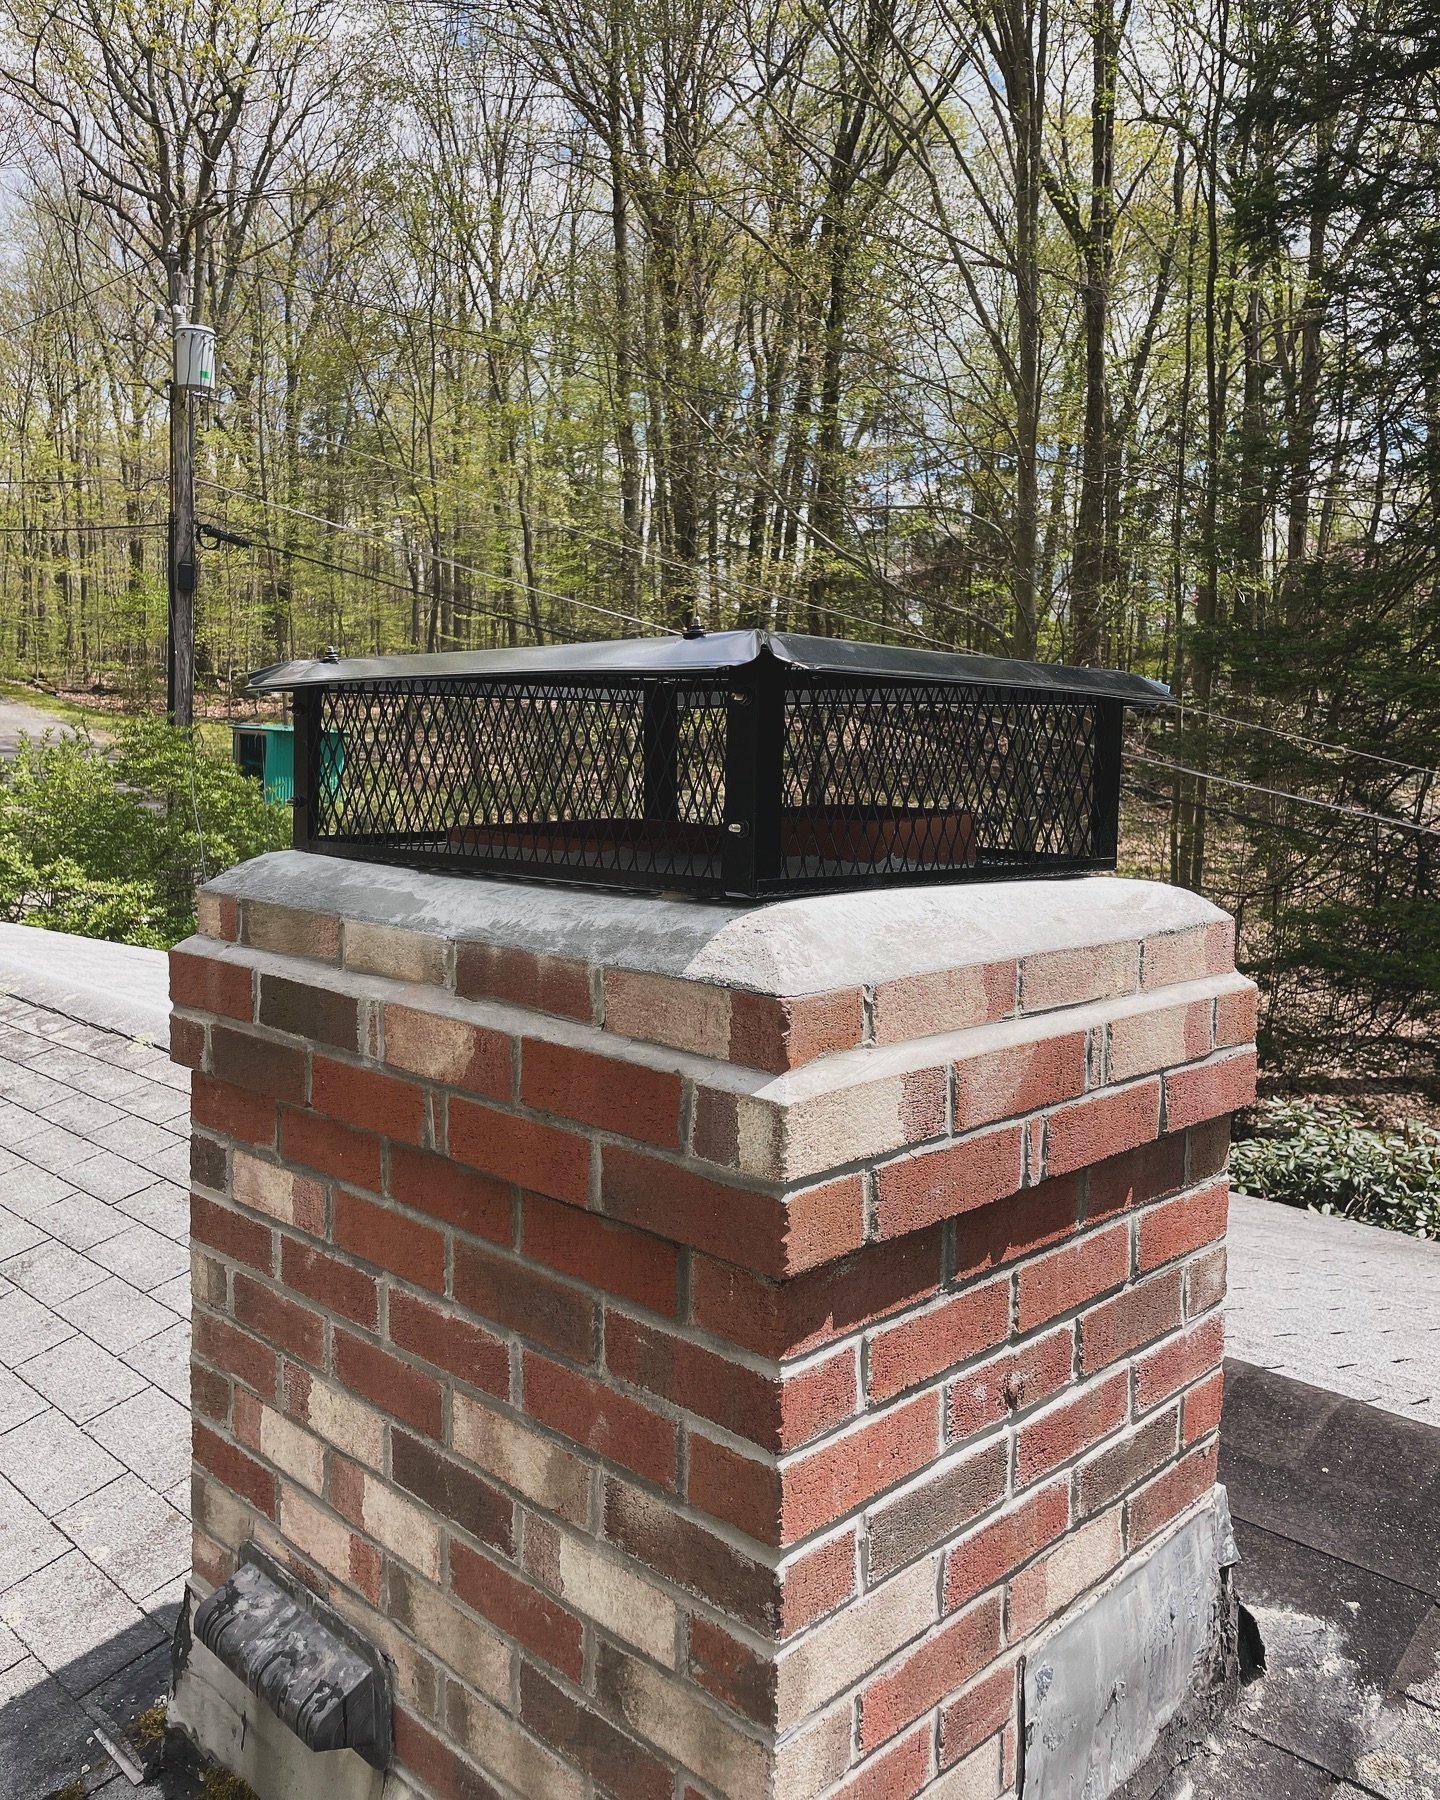 Chimney repair completed by Southern Mortar Works&bull;
&bull;
&bull;
&bull;
&bull;
&bull;
&bull;
#southernmortarworks #bricklaying #construction #masonrycontractor #masonry #brickmason #stonemason #brick #stonework